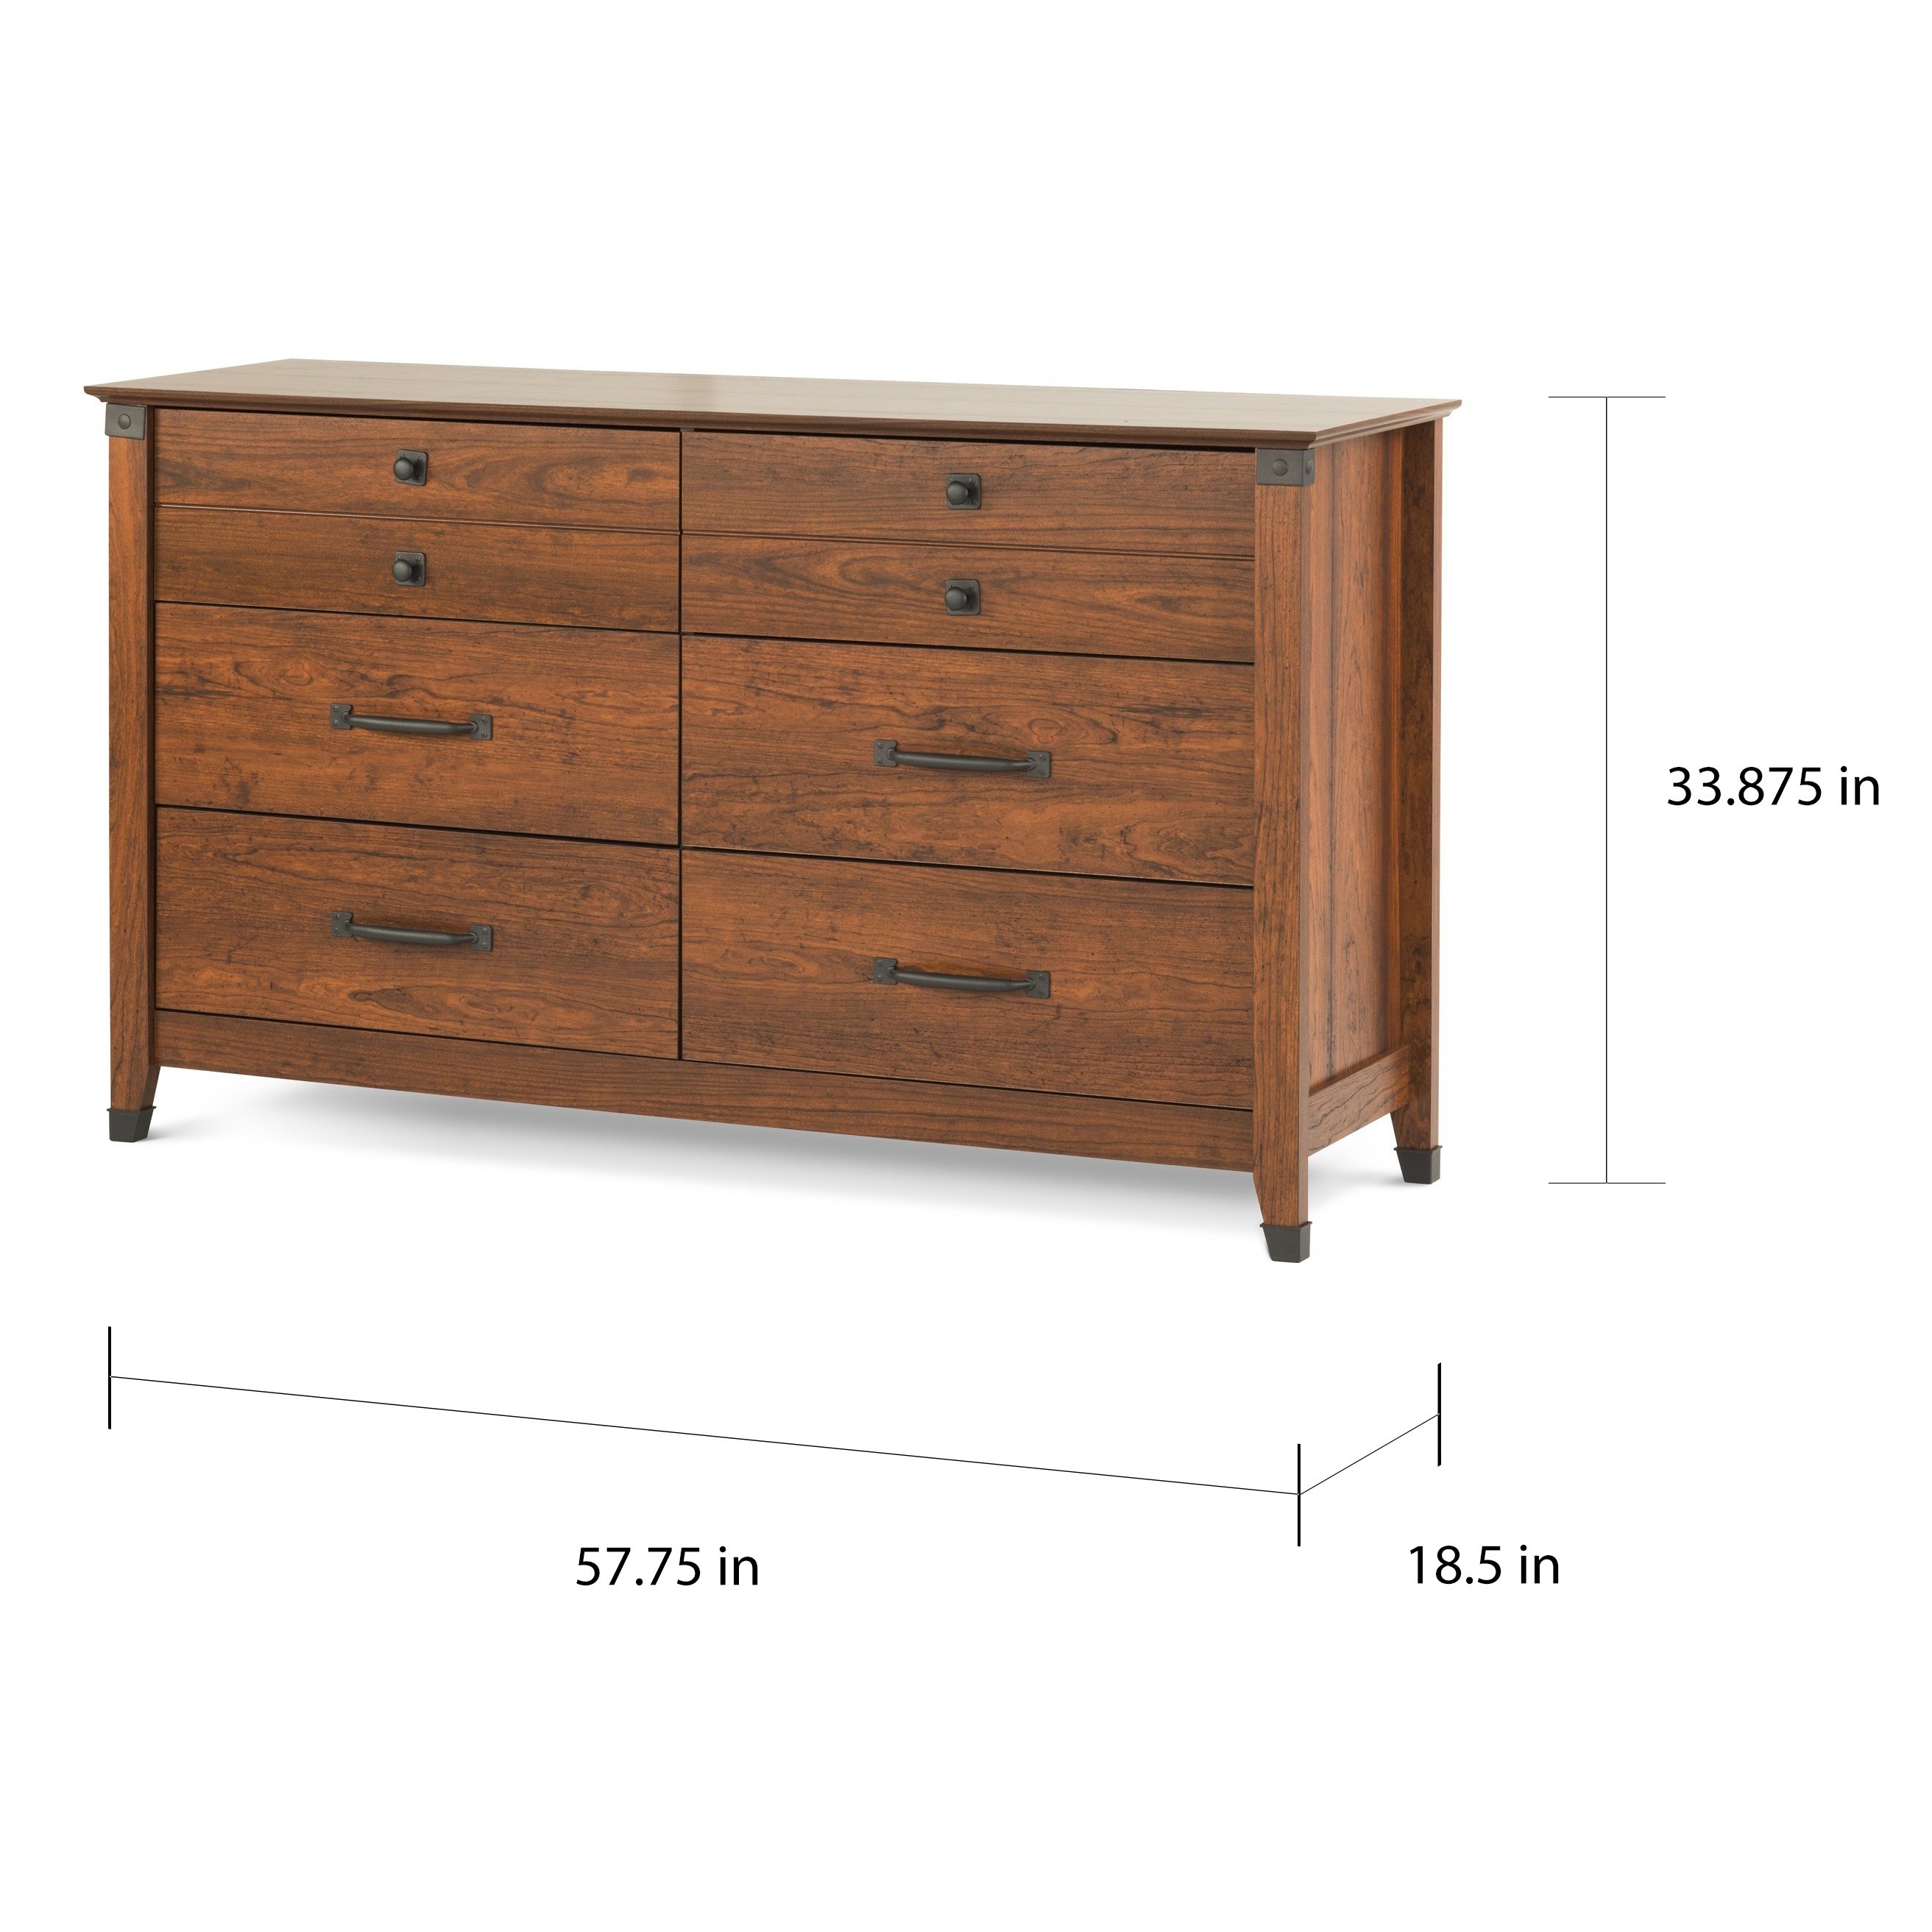 child craft redmond coach cherry double dresser free shipping accent table lighting today teak mirrored coffee very cocktail tablecloth skinny nightstand narrow sideboard console